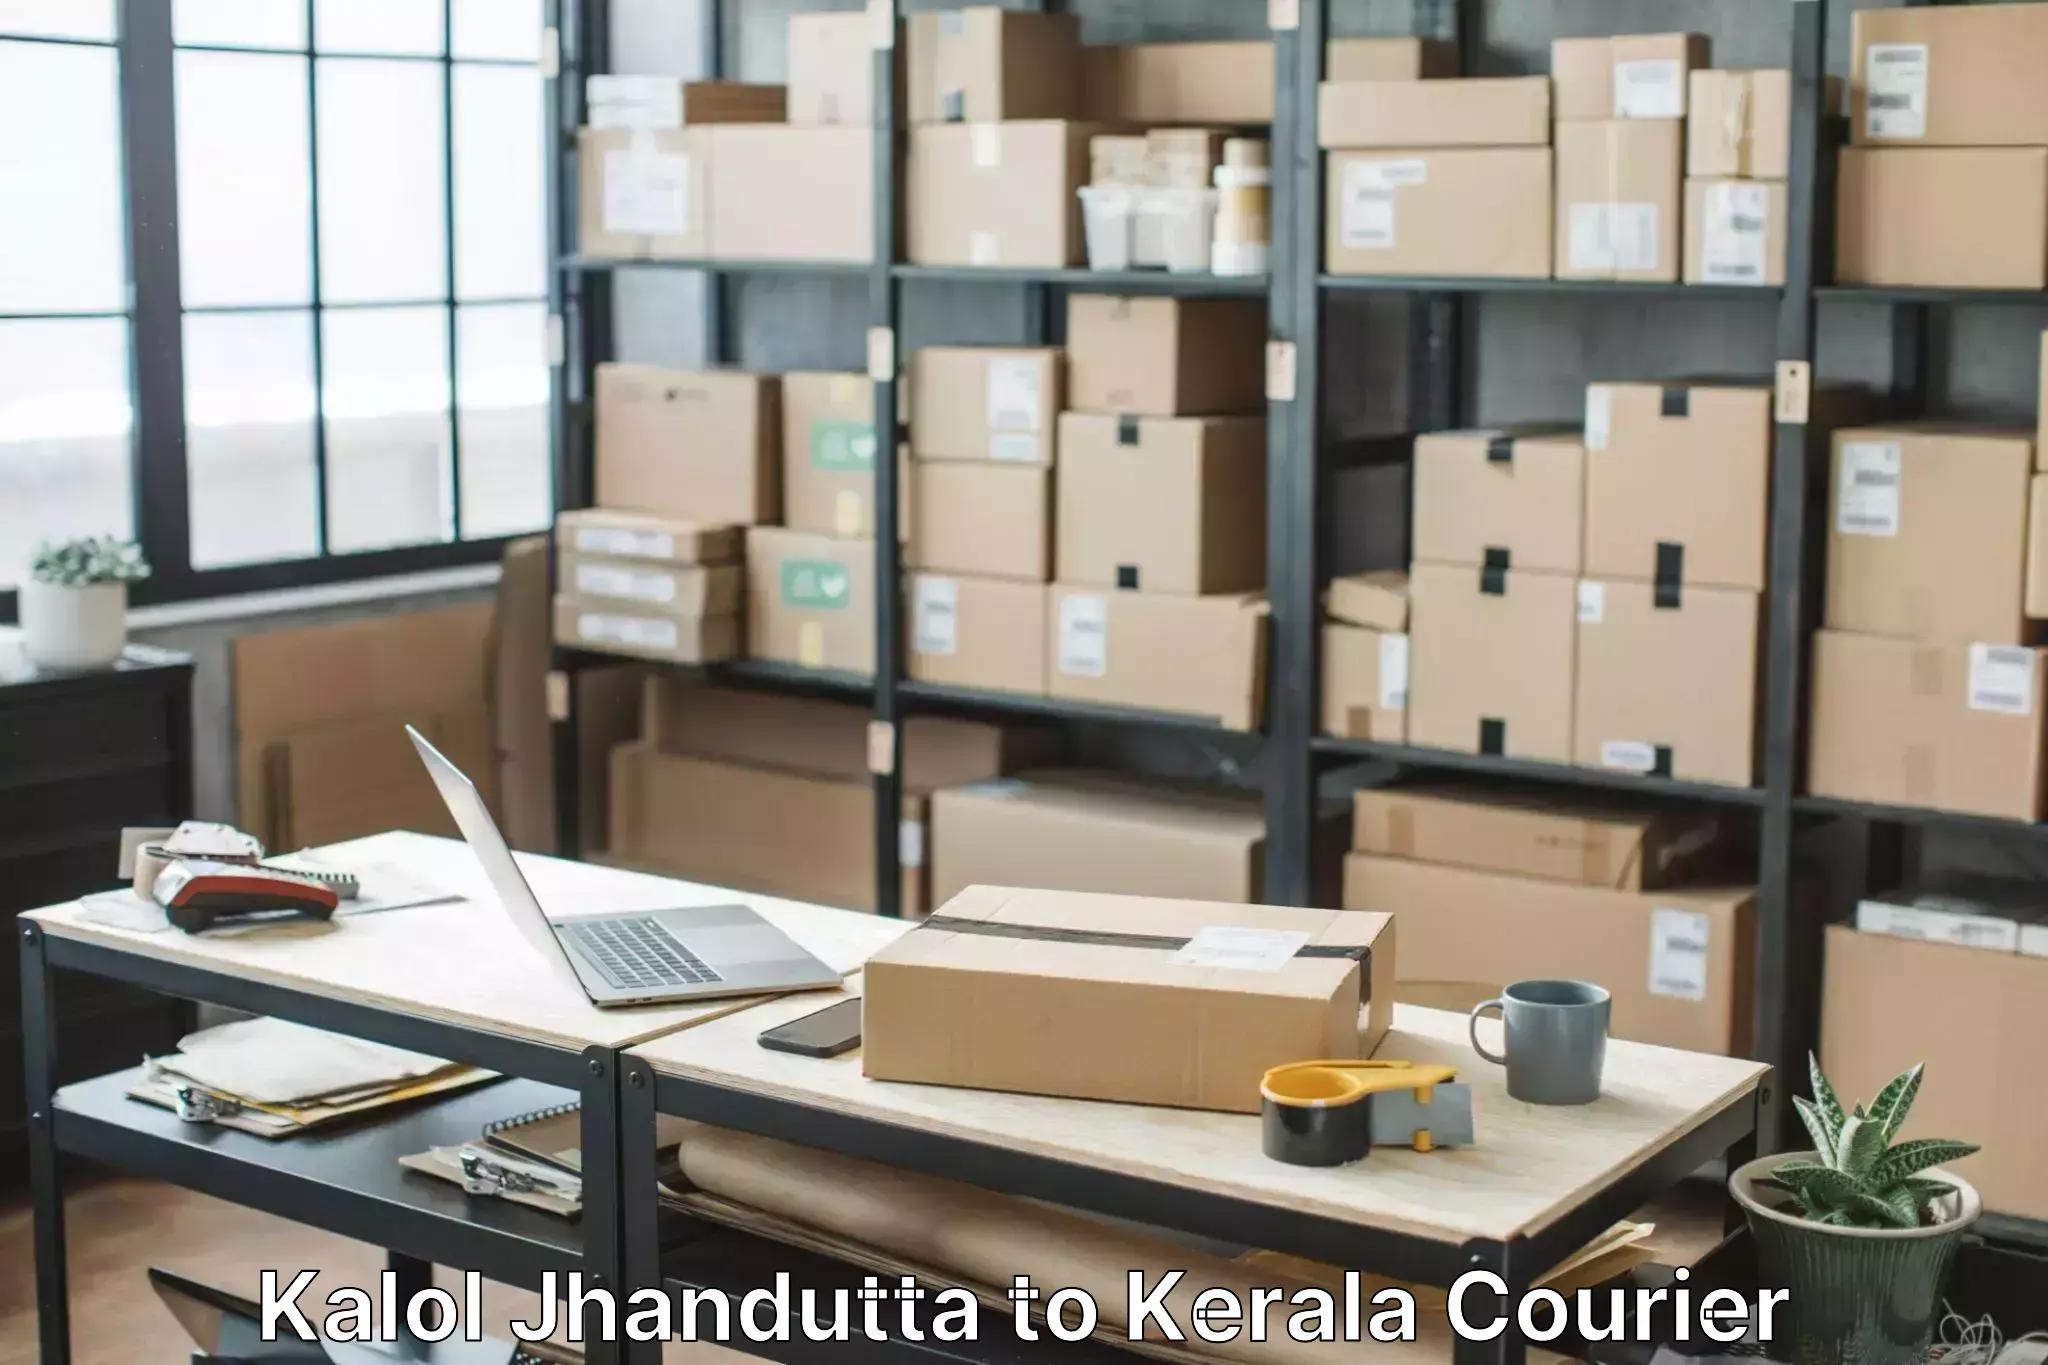 Furniture handling services Kalol Jhandutta to Cochin University of Science and Technology